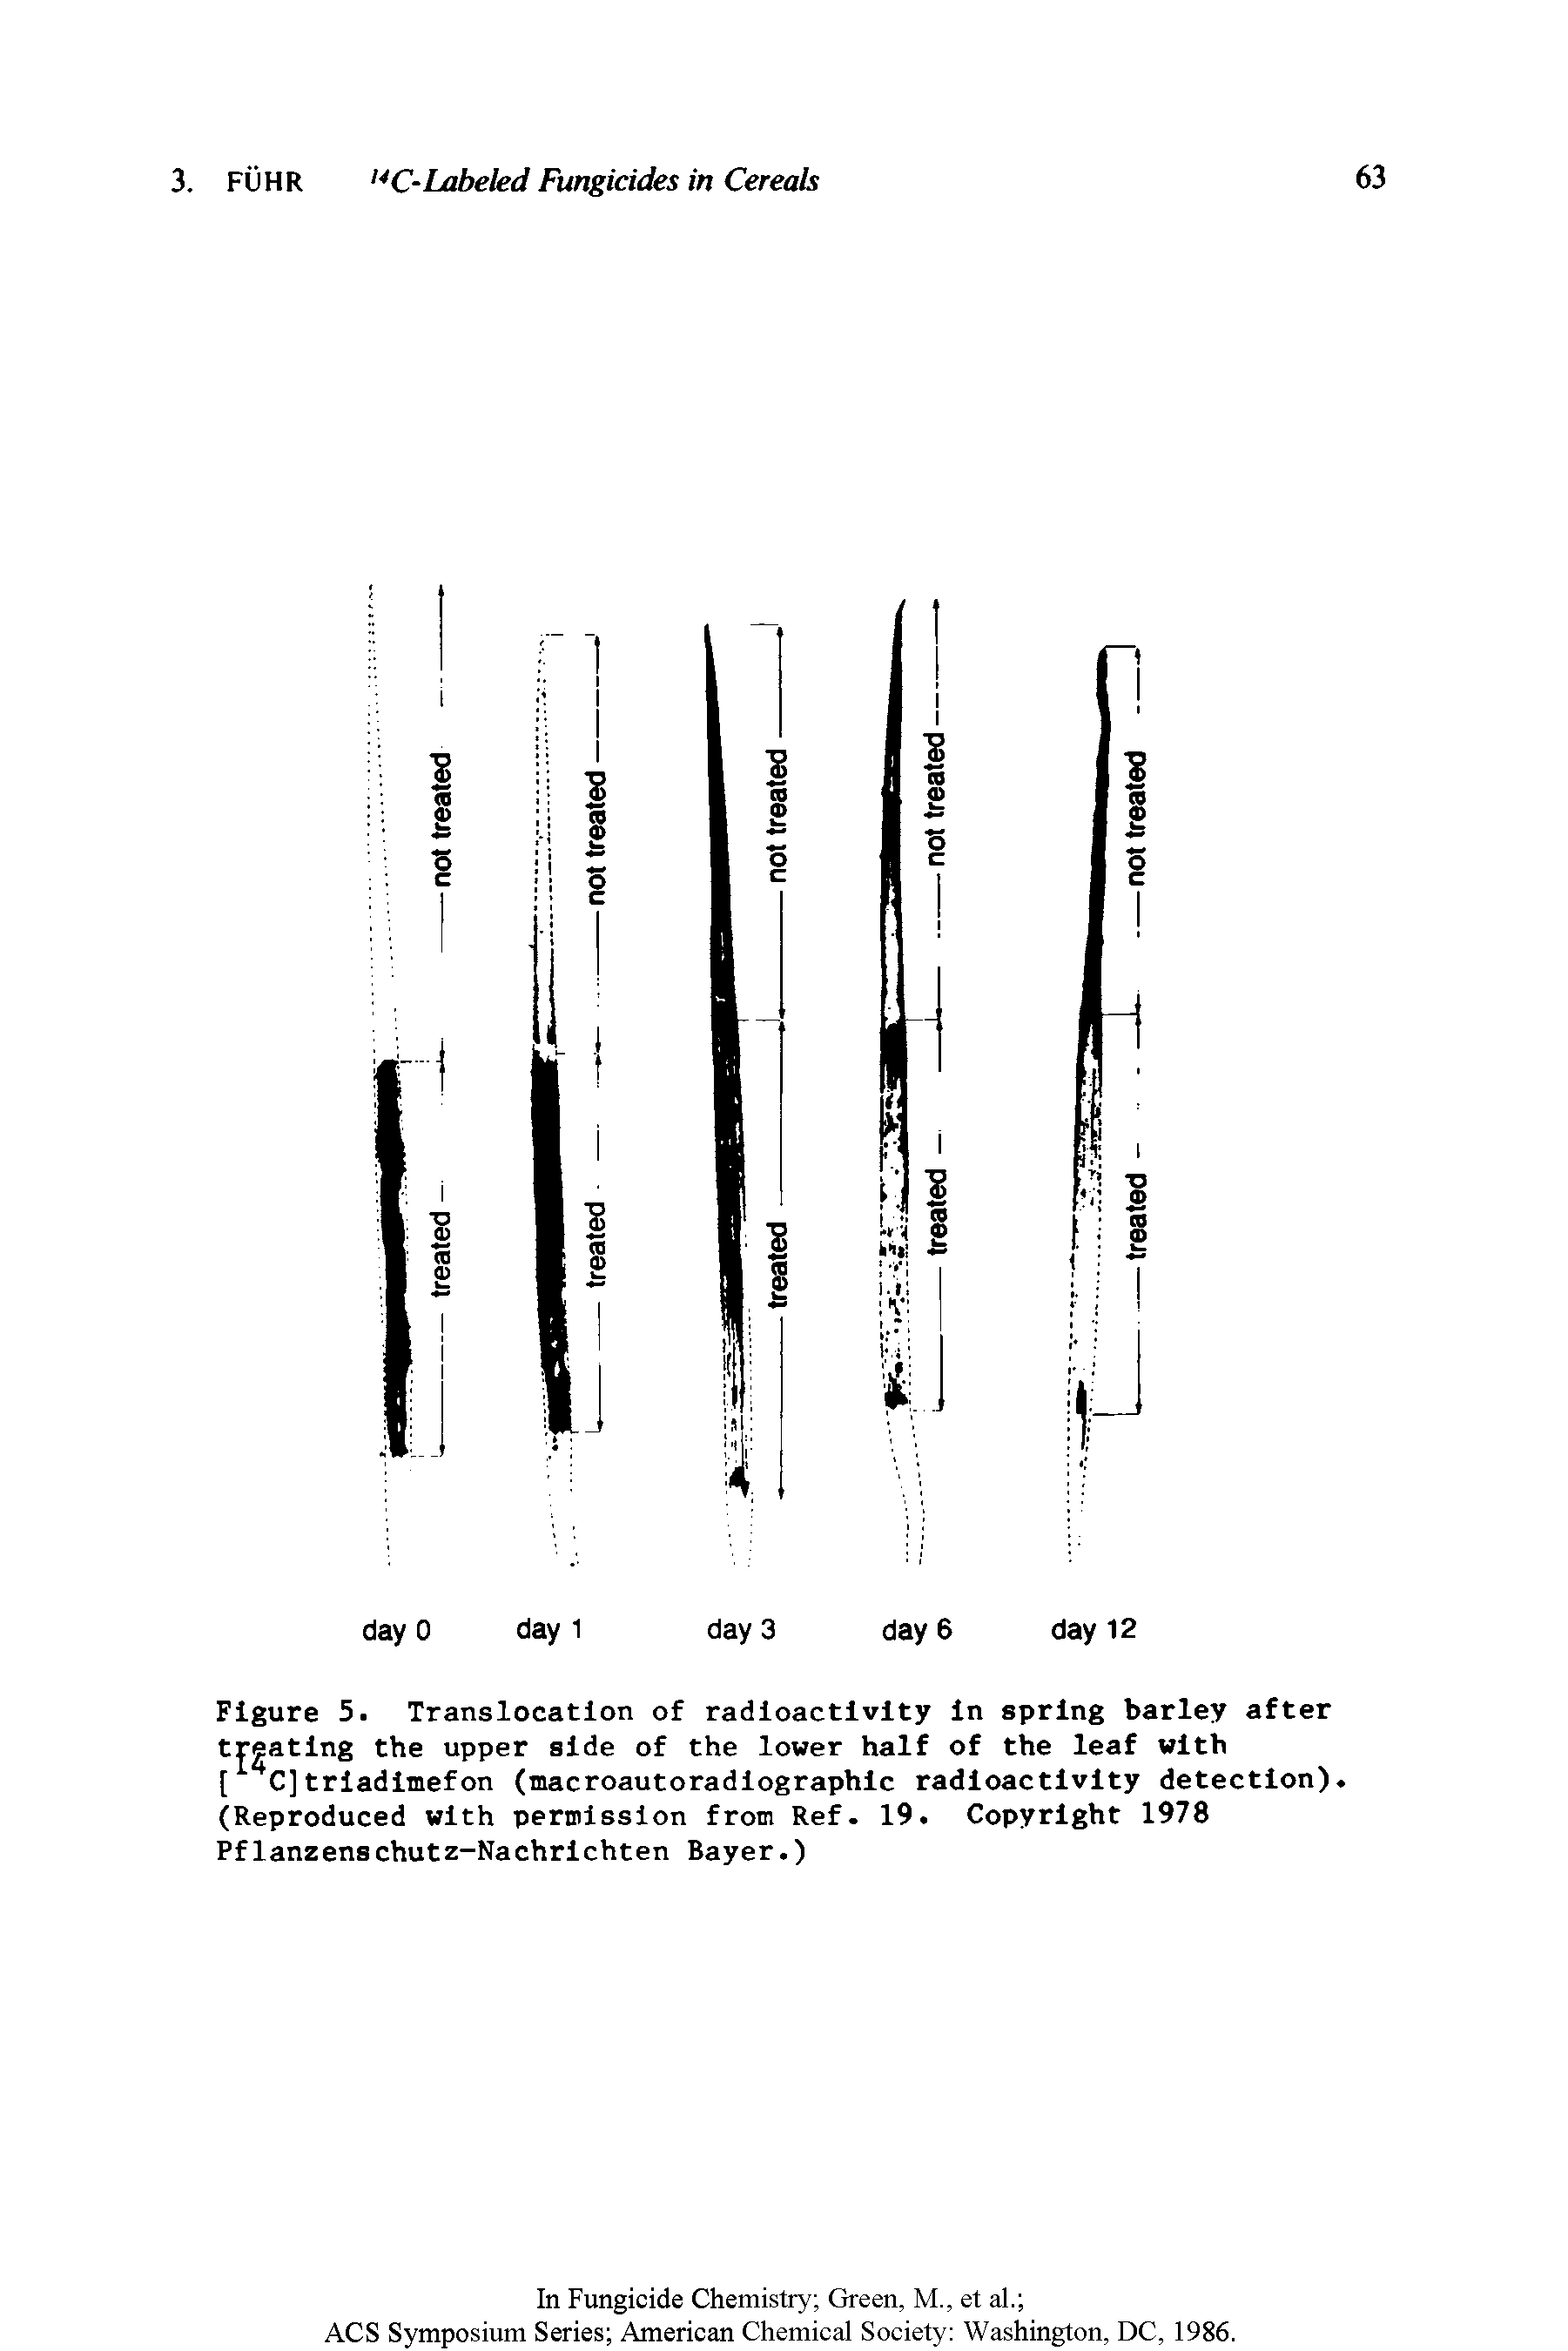 Figure 5. Translocation of radioactivity in spring barley after testing the upper side of the lower half of the leaf with [ C]triadimefon (macroautoradiographic radioactivity detection). (Reproduced with permission from Ref. 19. Copyright 1978 Pflanzenschutz-Nachrichten Bayer.)...